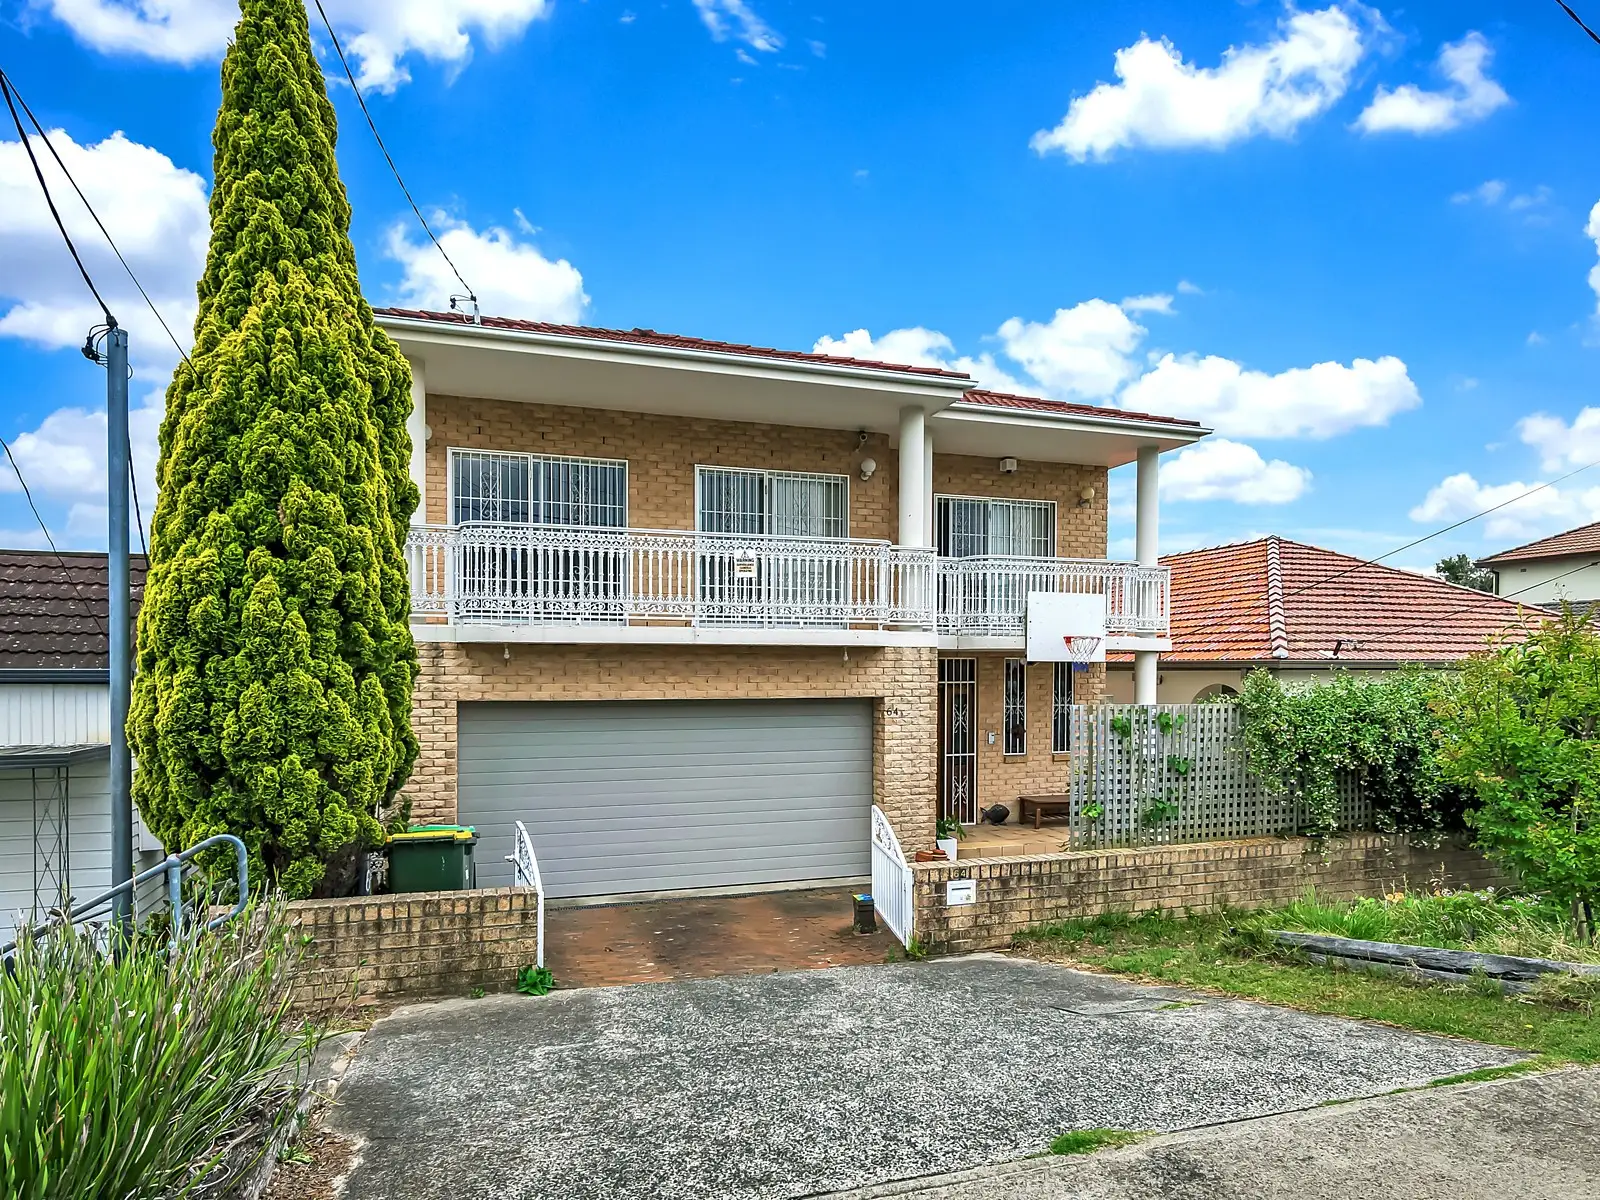 Photo #1: 64 Gale Road, Maroubra - Sold by Sydney Sotheby's International Realty